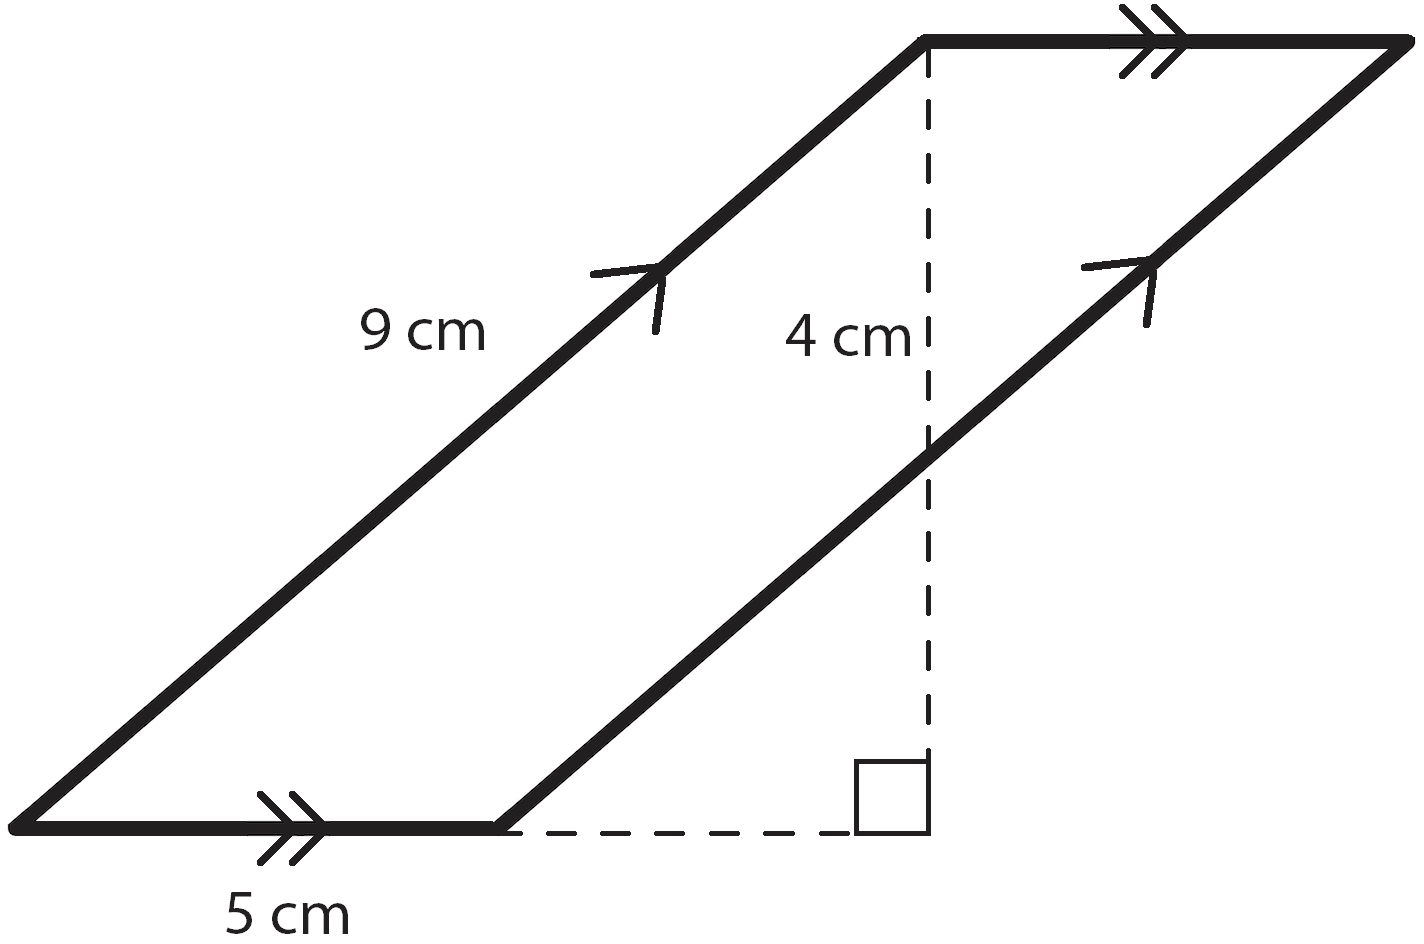 A vertical parallelogram with the left side measured at 9 centimeters, the bottom measured at 5 centimeters, and the height measured at 5 centimeters